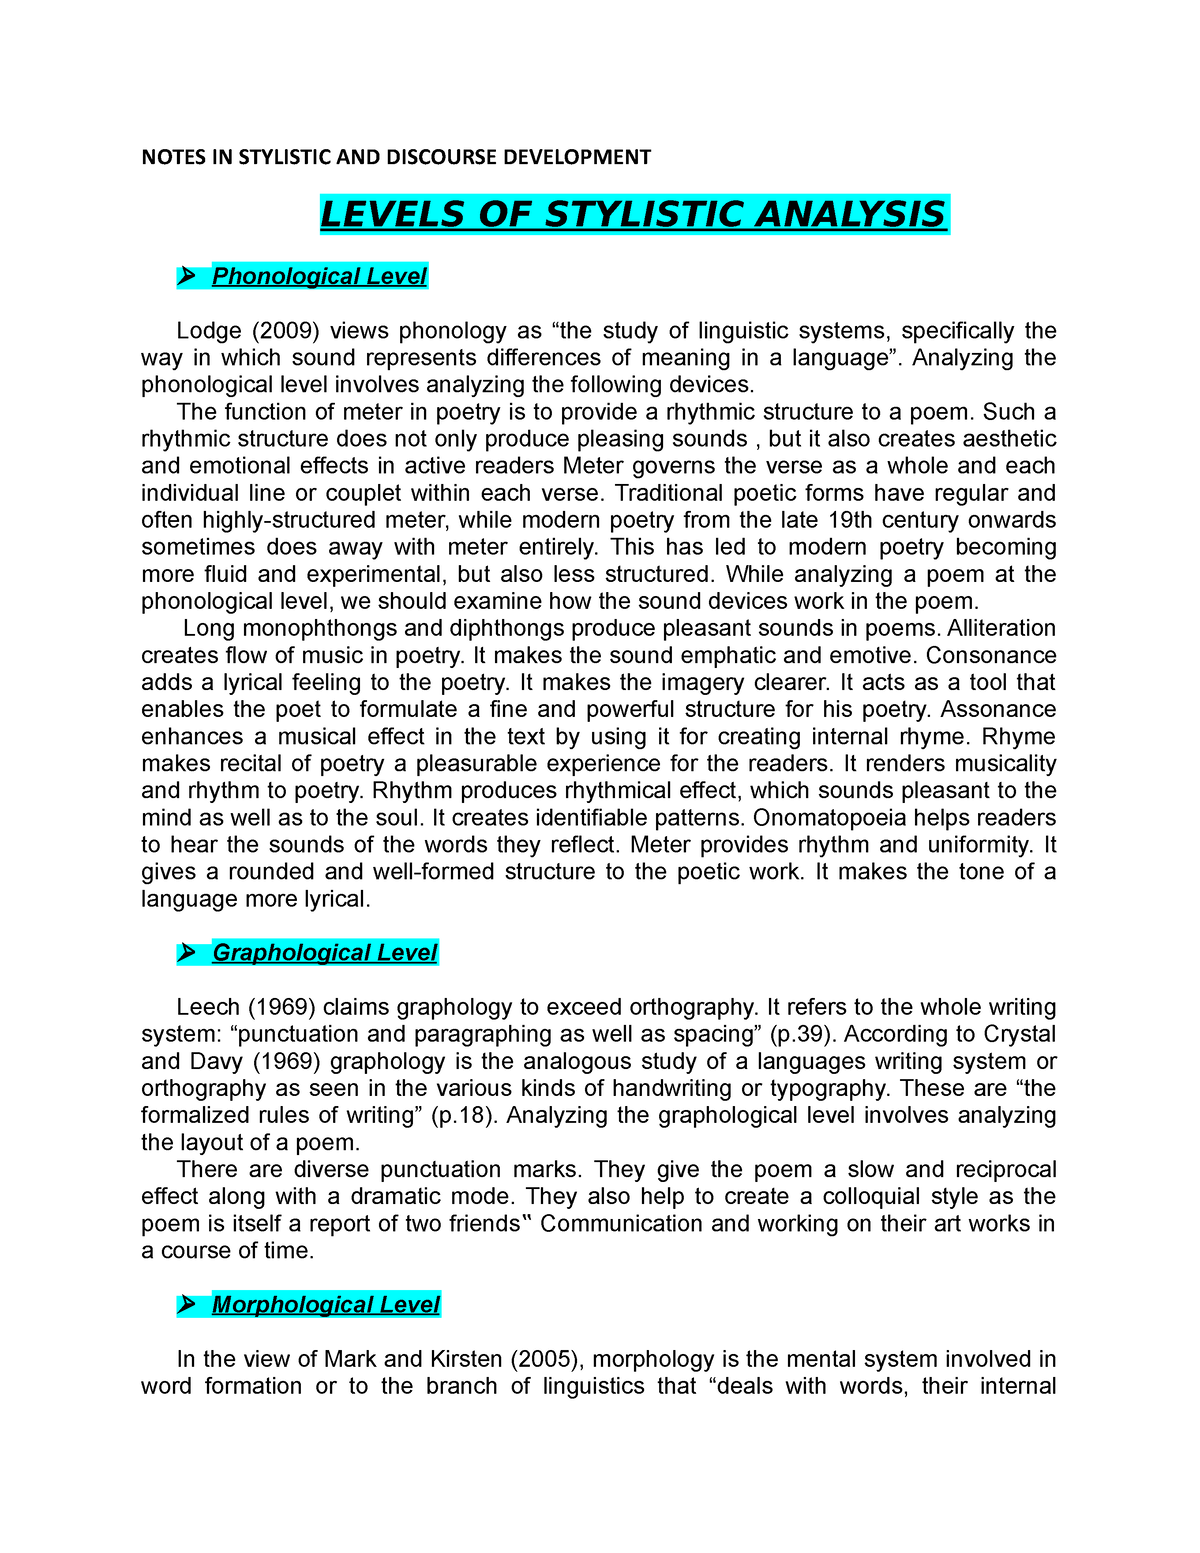 thesis on stylistic analysis of novel